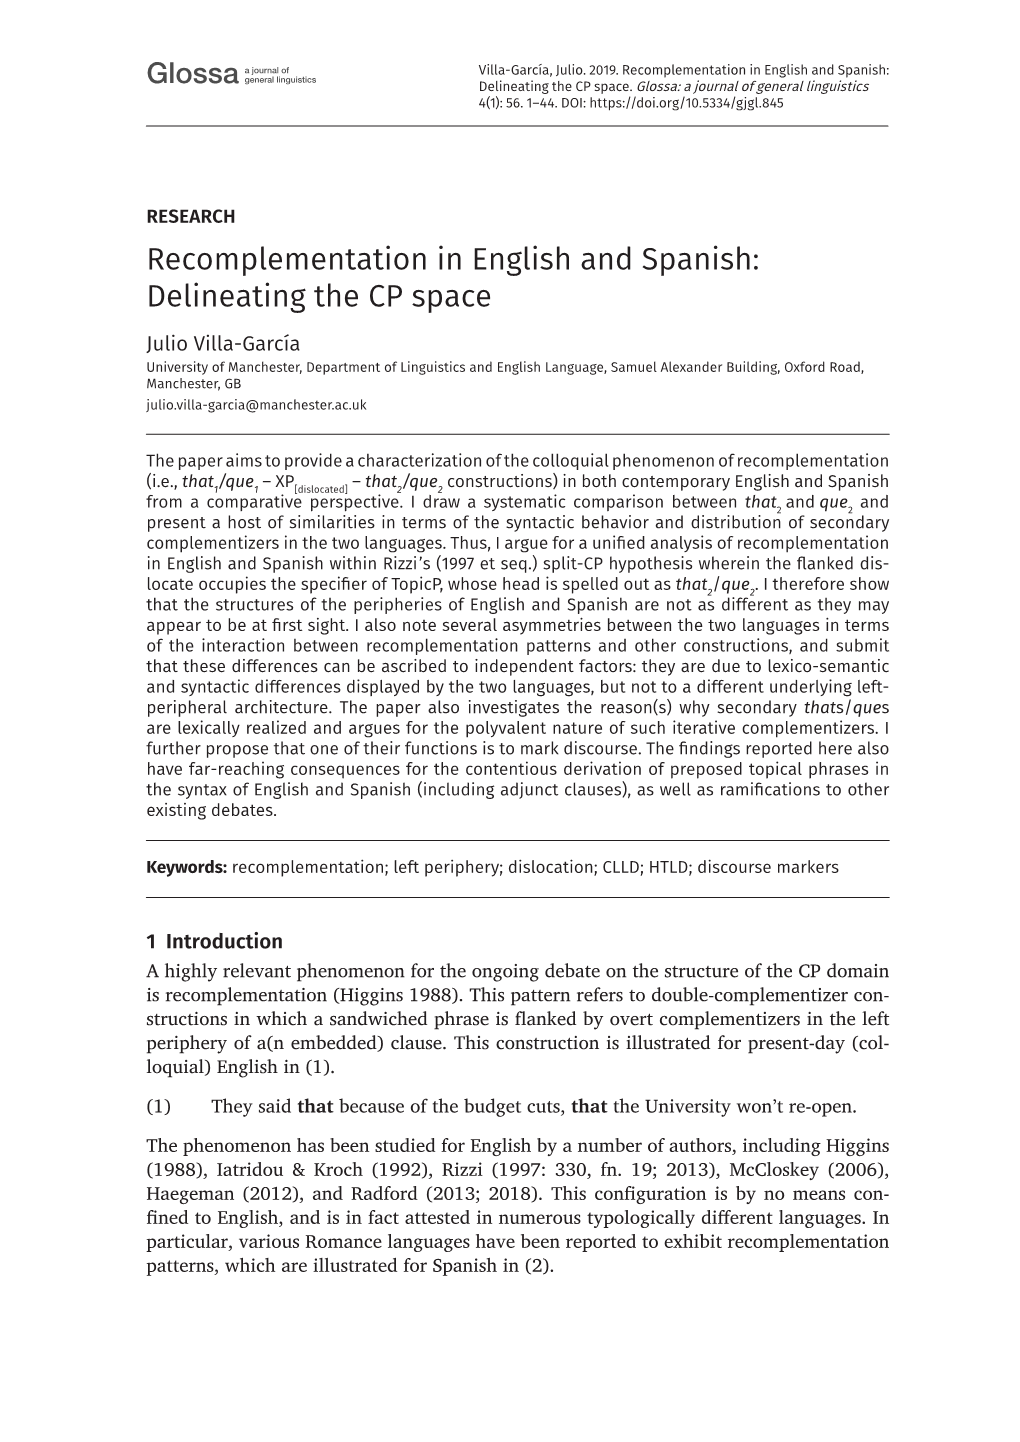 Recomplementation in English and Spanish: Delineating the CP Space